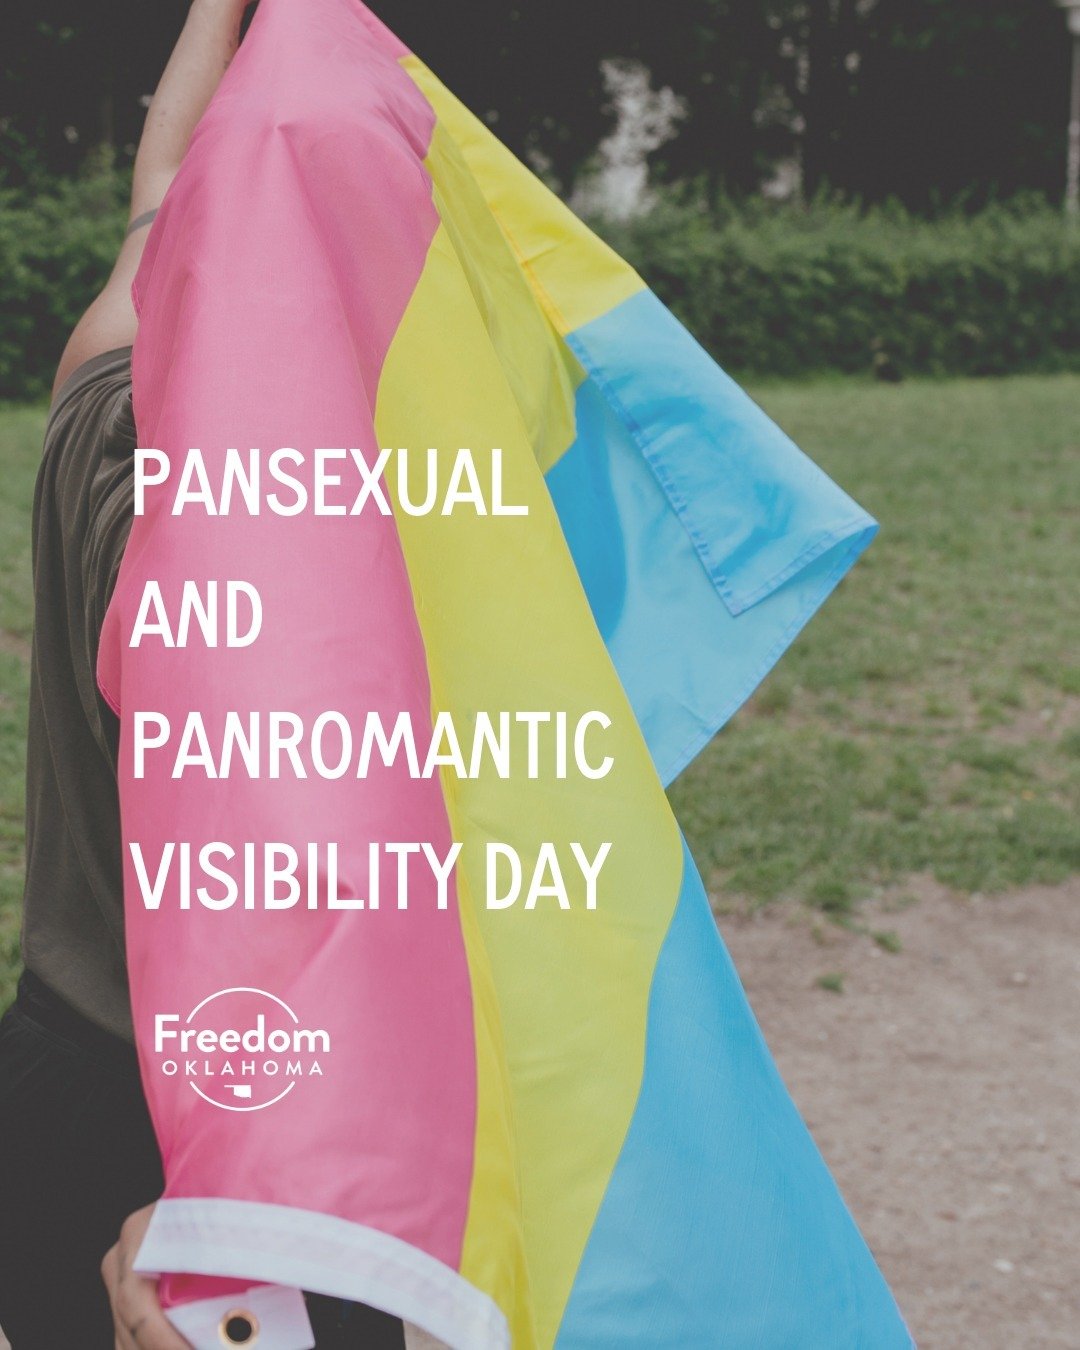 Happy Pansexual and Panromantic Visibility Day! We see you. We celebrate you. Today and all year long. 

ID: photo of someone holding a pansexual pride flag with text &quot;Pansexual and Panromantic Visibility Day&quot; and a Freedom Oklahoma logo.